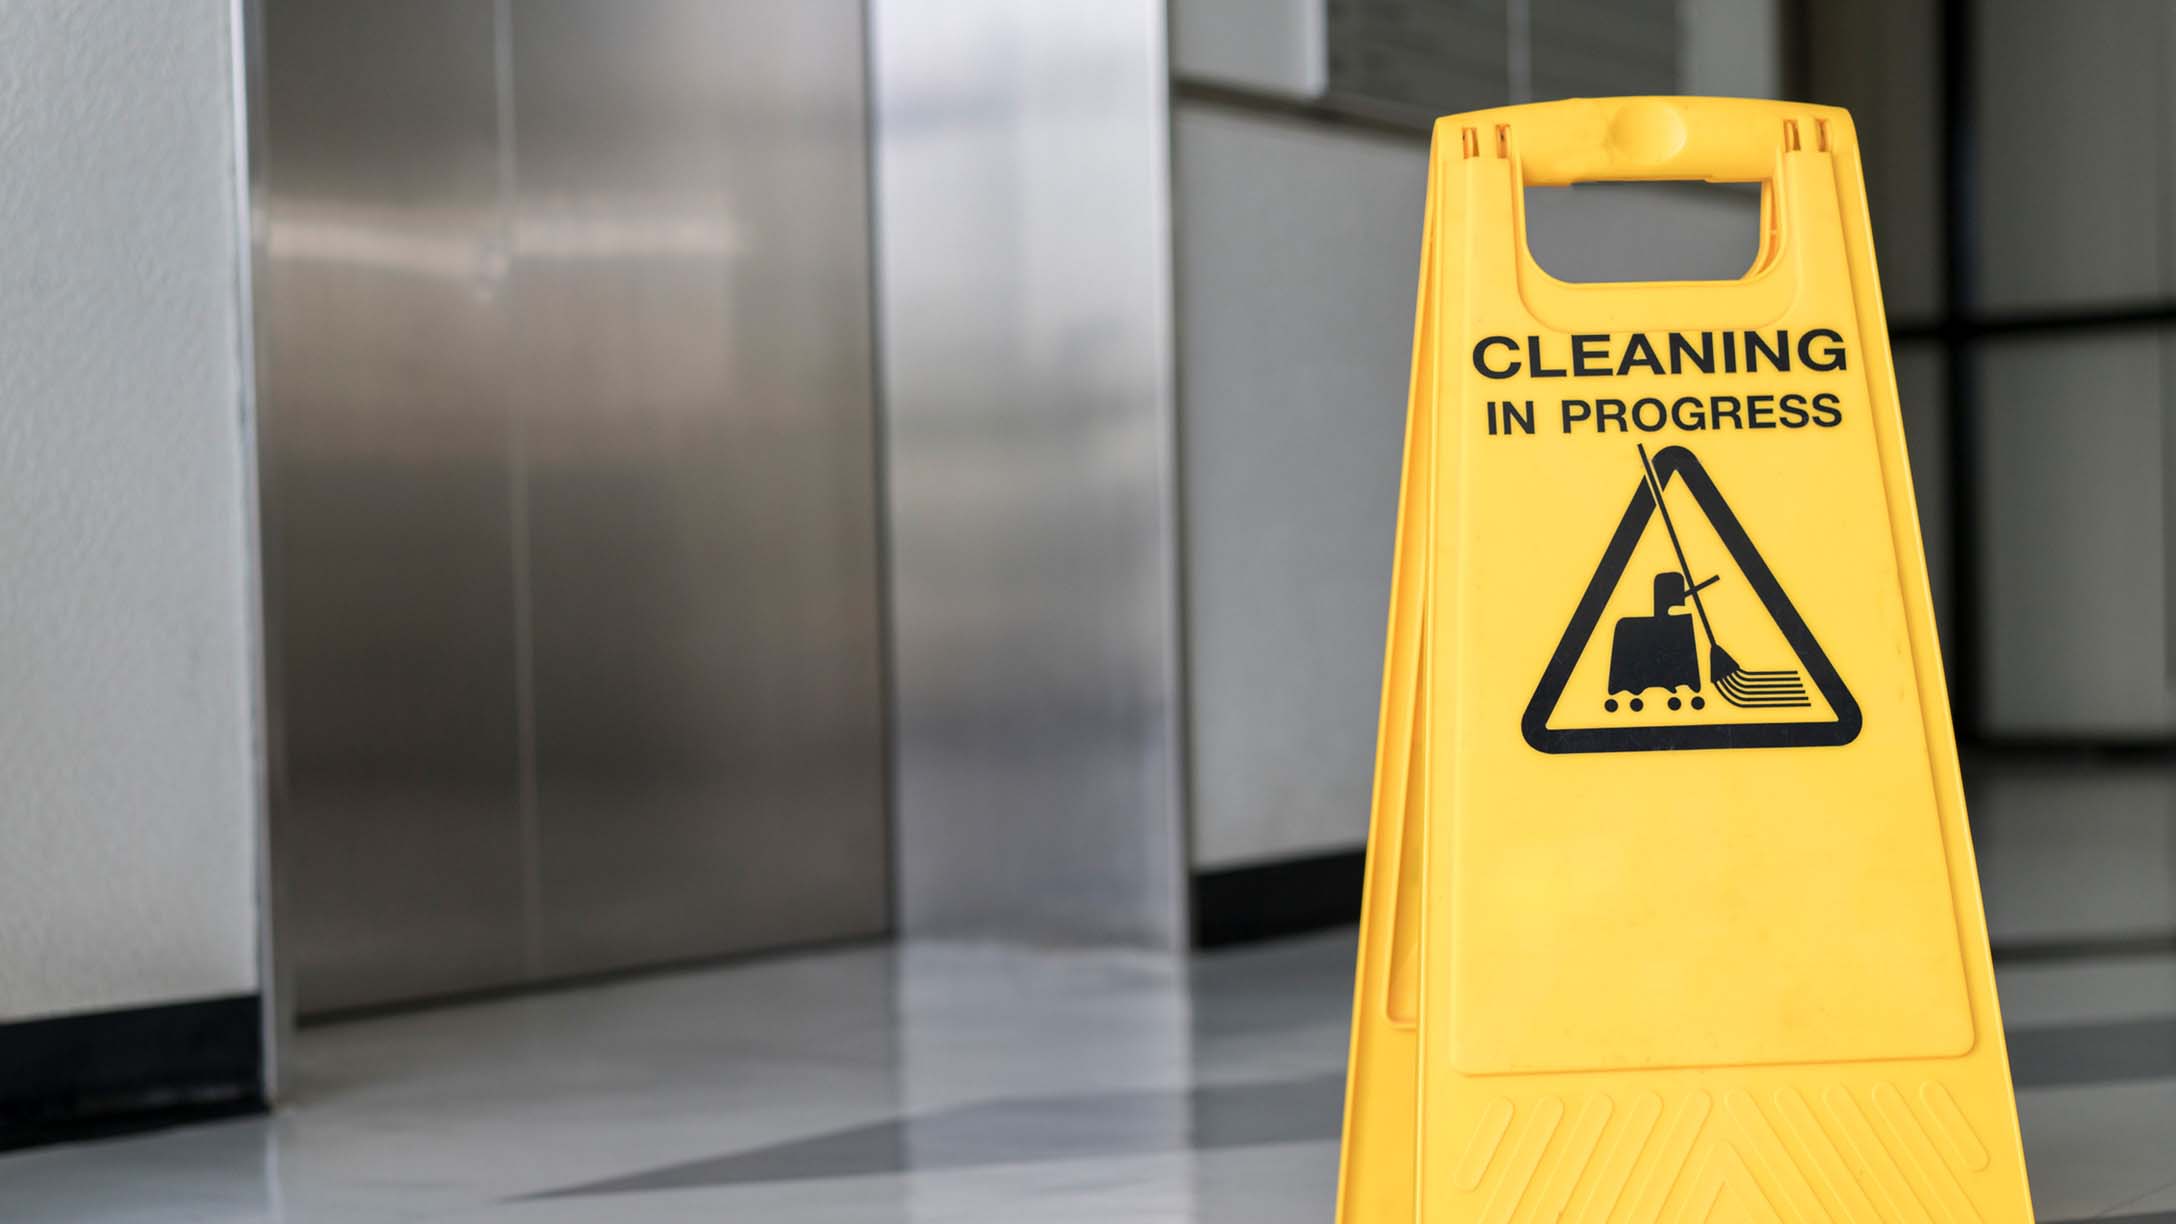 Image of a wet floor sign with "cleaning in progress" on it